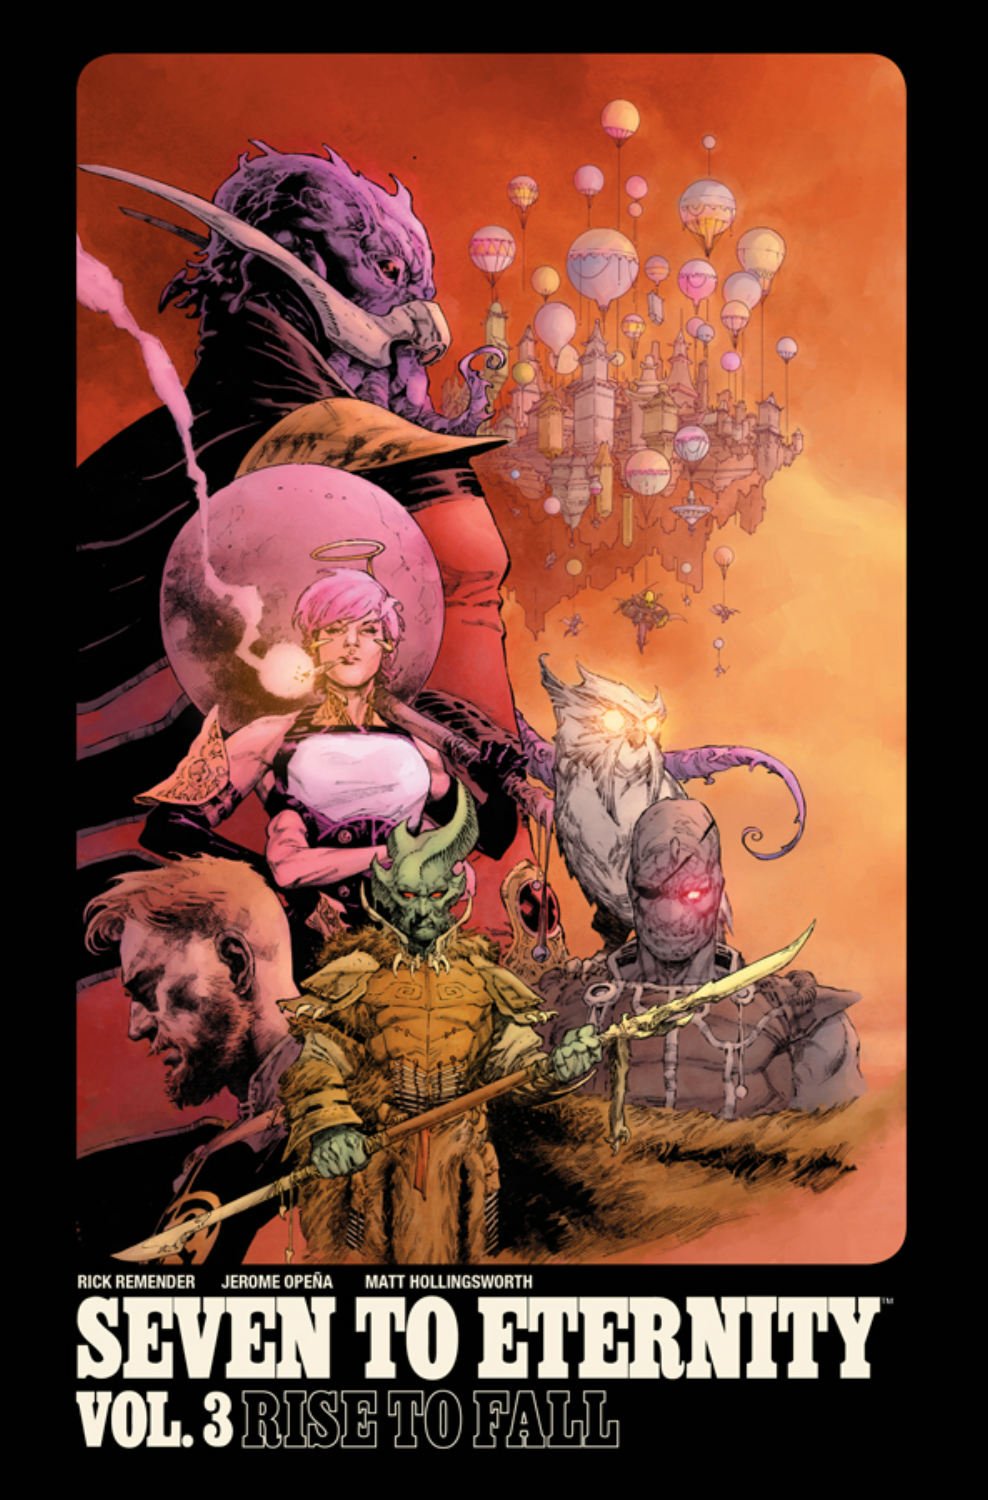 Seven To Eternity Vol. 3 Rise To Fall - Graphic Novel - The Hooded Goblin